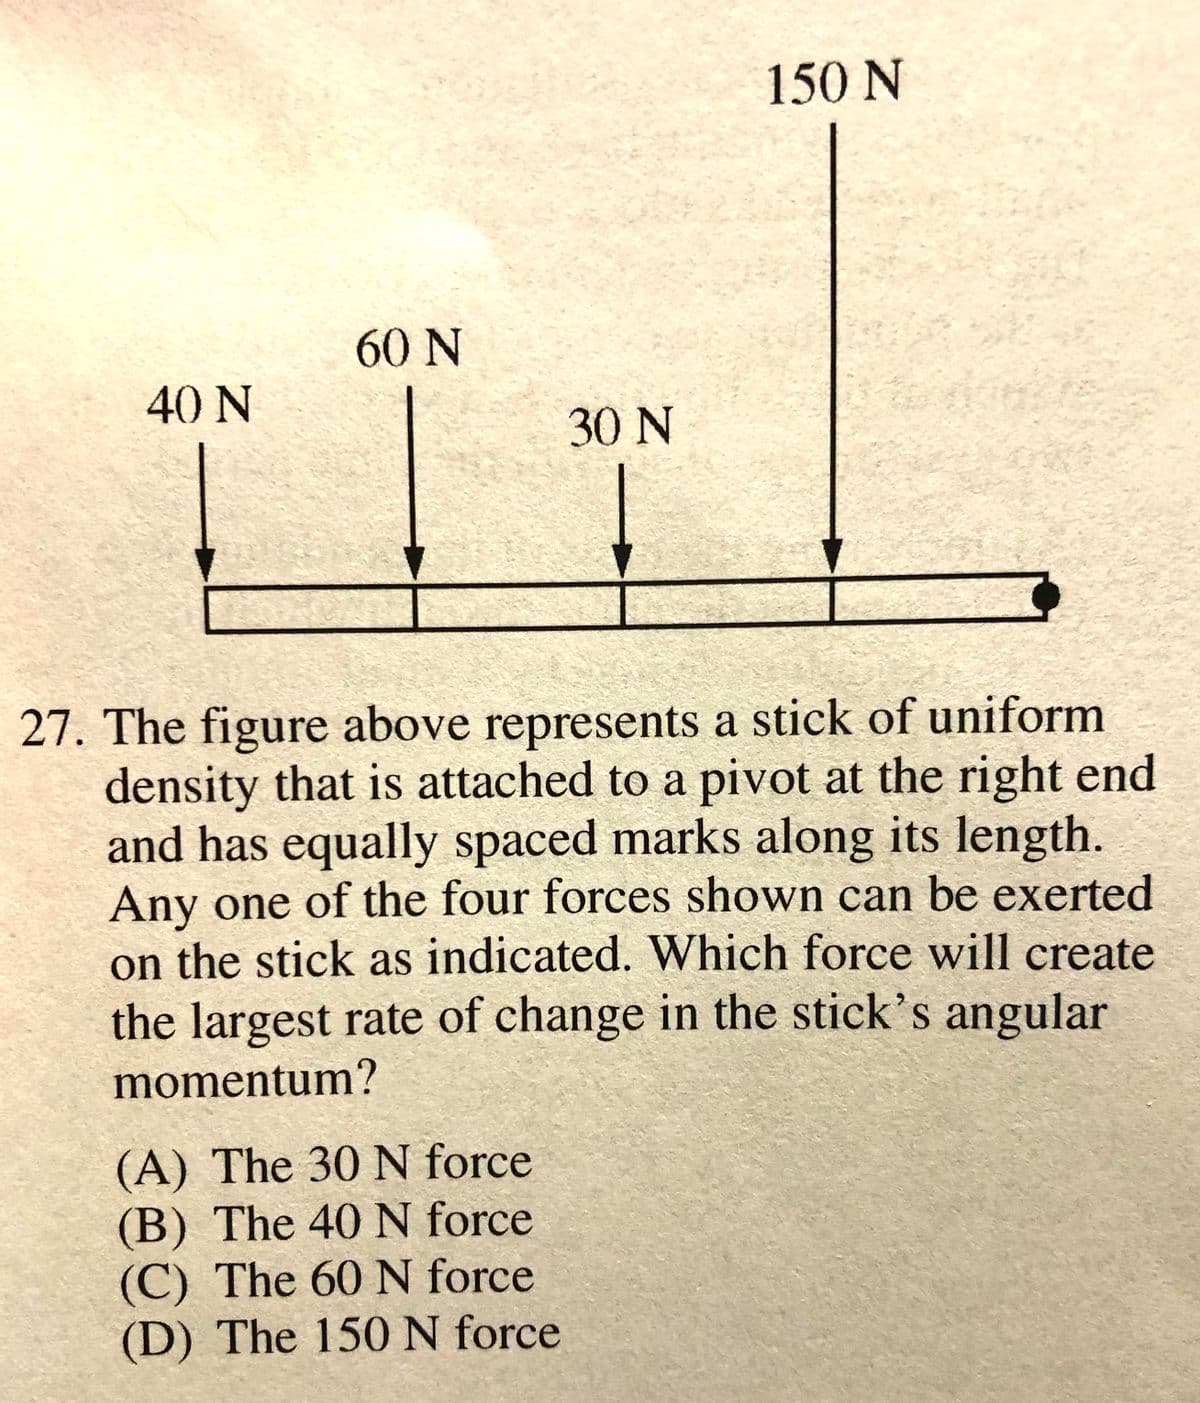 150 N
60 N
40 N
30 N
27. The figure above represents a stick of uniform
density that is attached to a pivot at the right end
and has equally spaced marks along its length.
Any one of the four forces shown can be exerted
on the stick as indicated. Which force will create
the largest rate of change in the stick's angular
momentum?
(A) The 30 N force
(B) The 40 N force
(C) The 60 N force
(D) The 150N force
